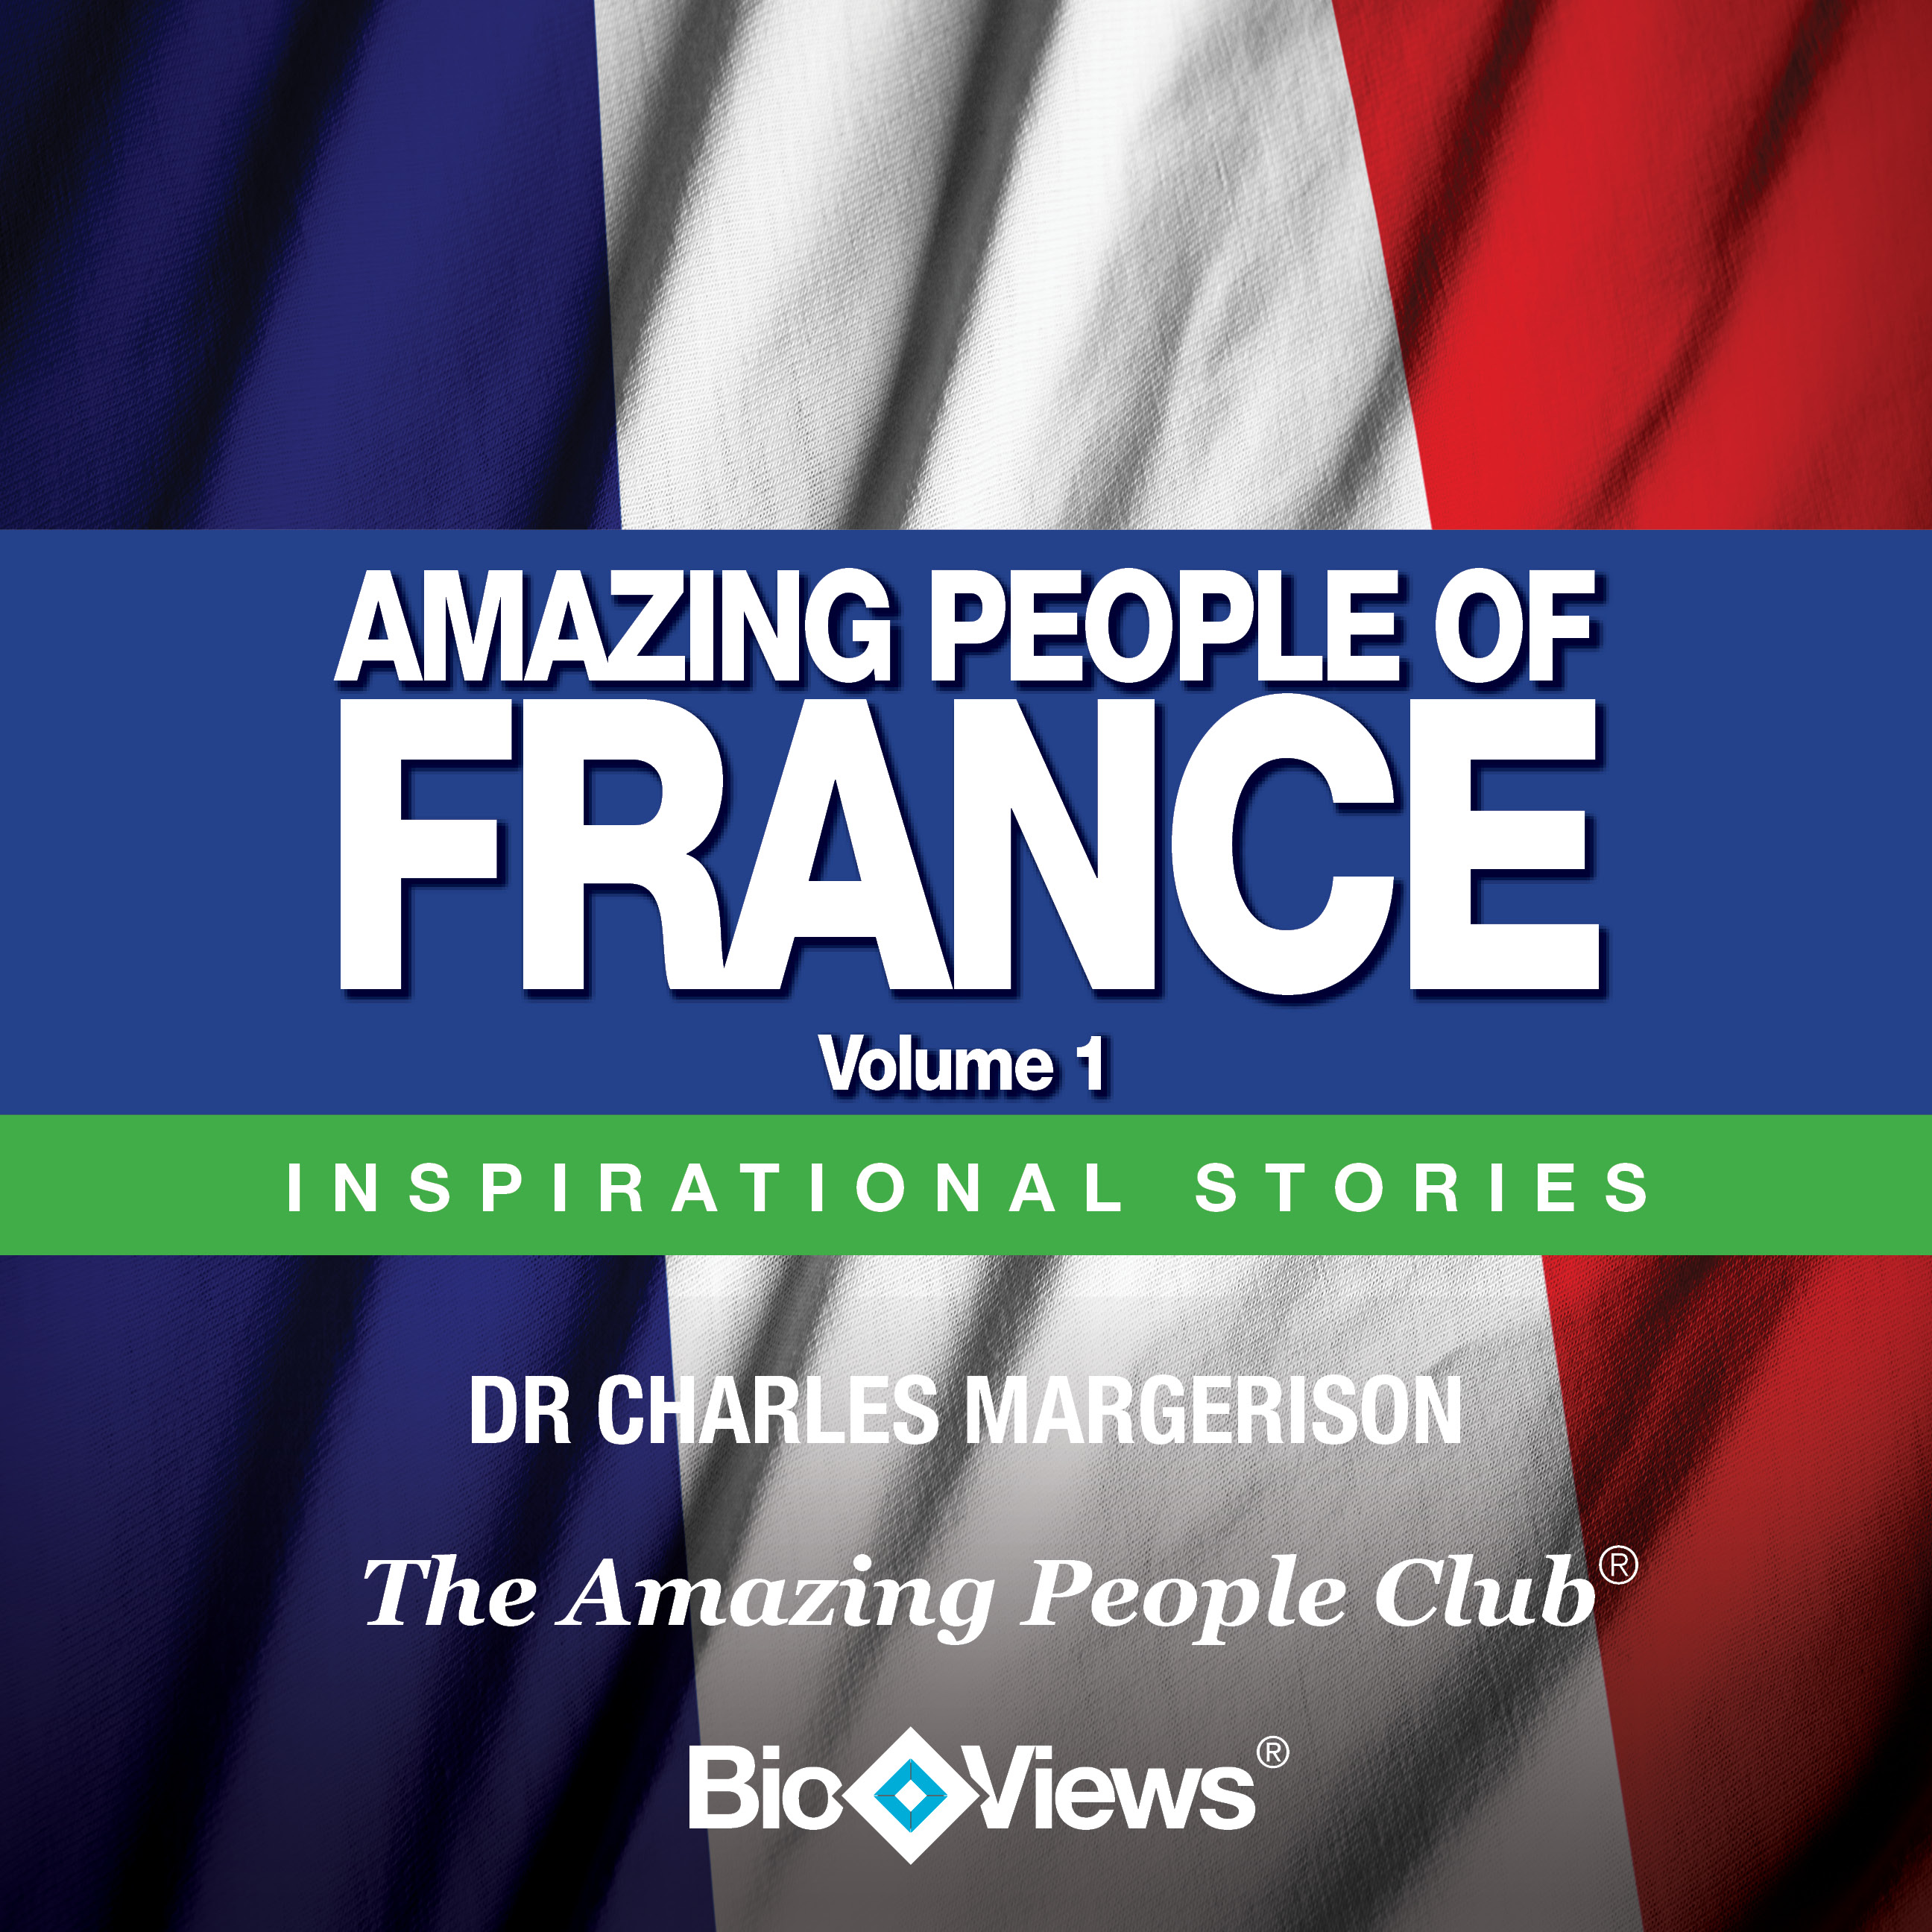 Amazing People of France, Vol. 1: Inspirational Stories Audiobook, by Charles Margerison